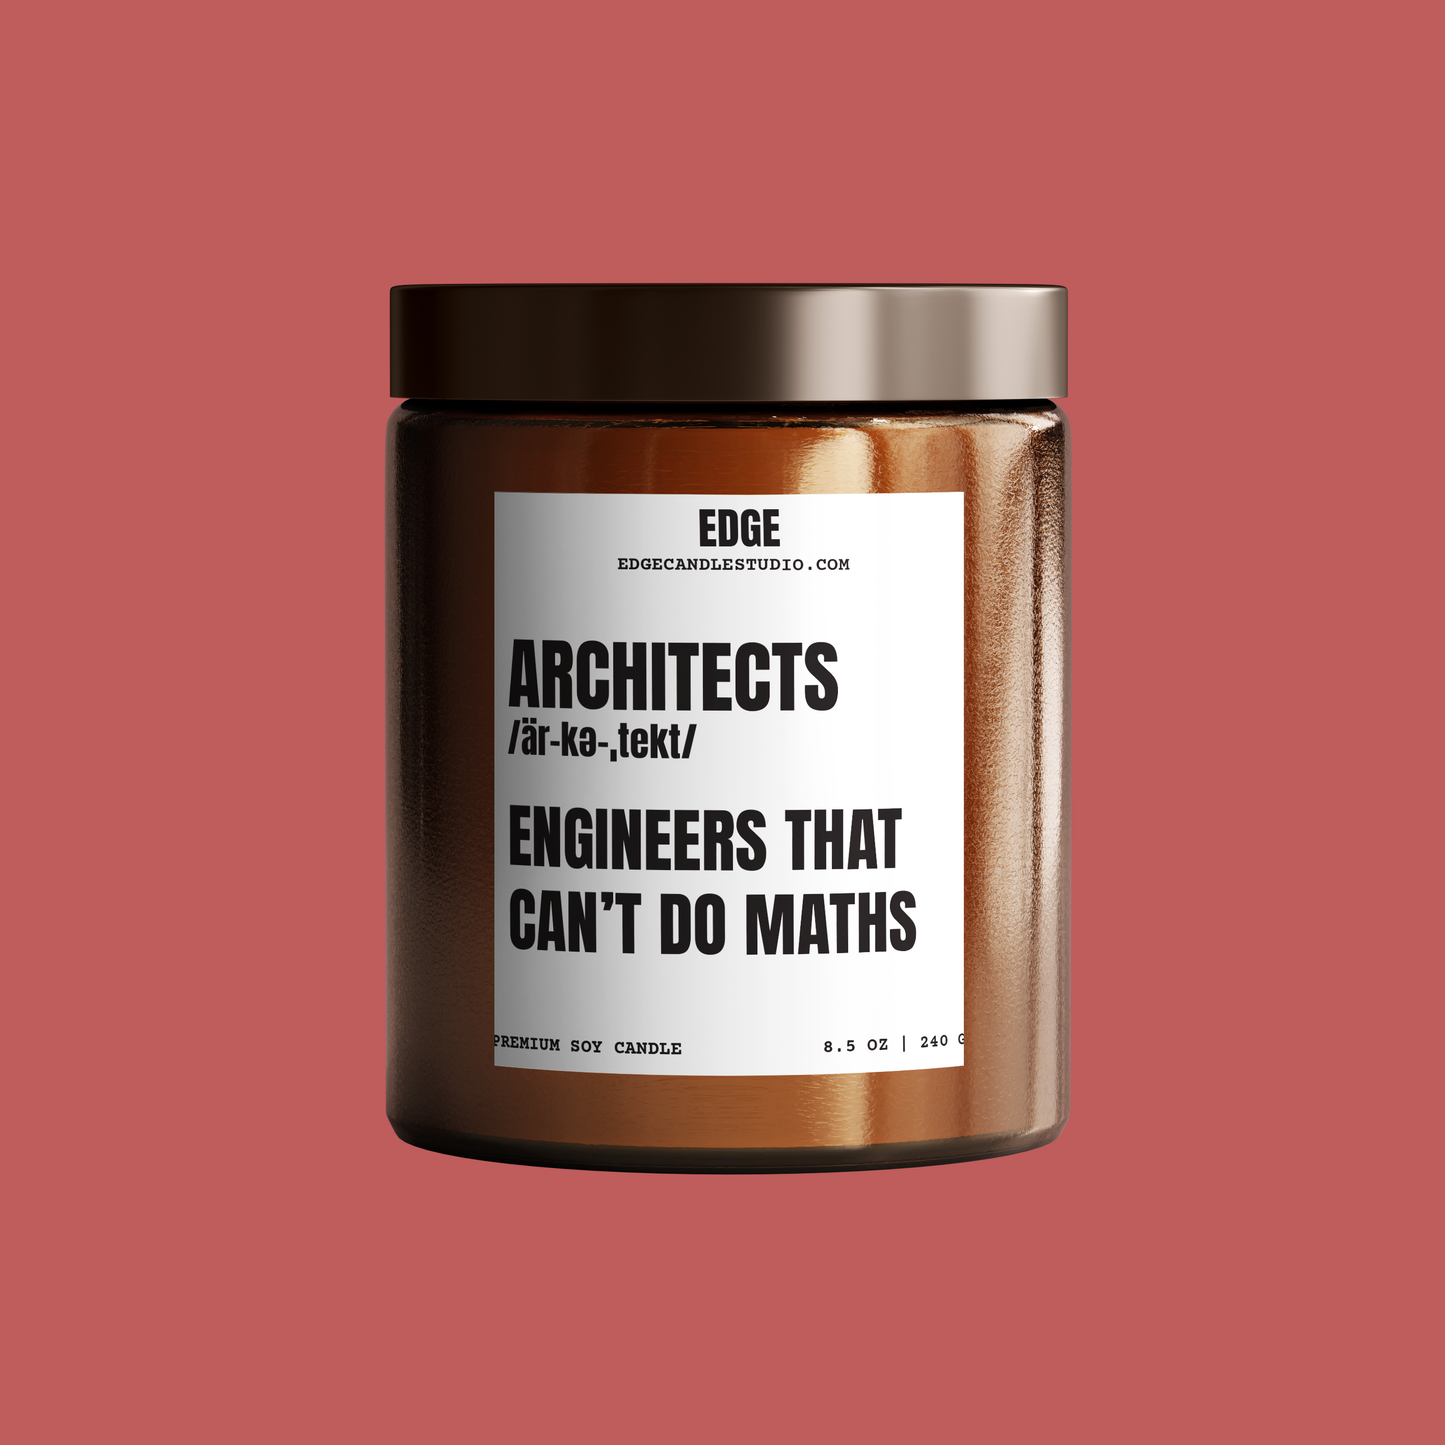 Architects, Engineers That can't Do Maths